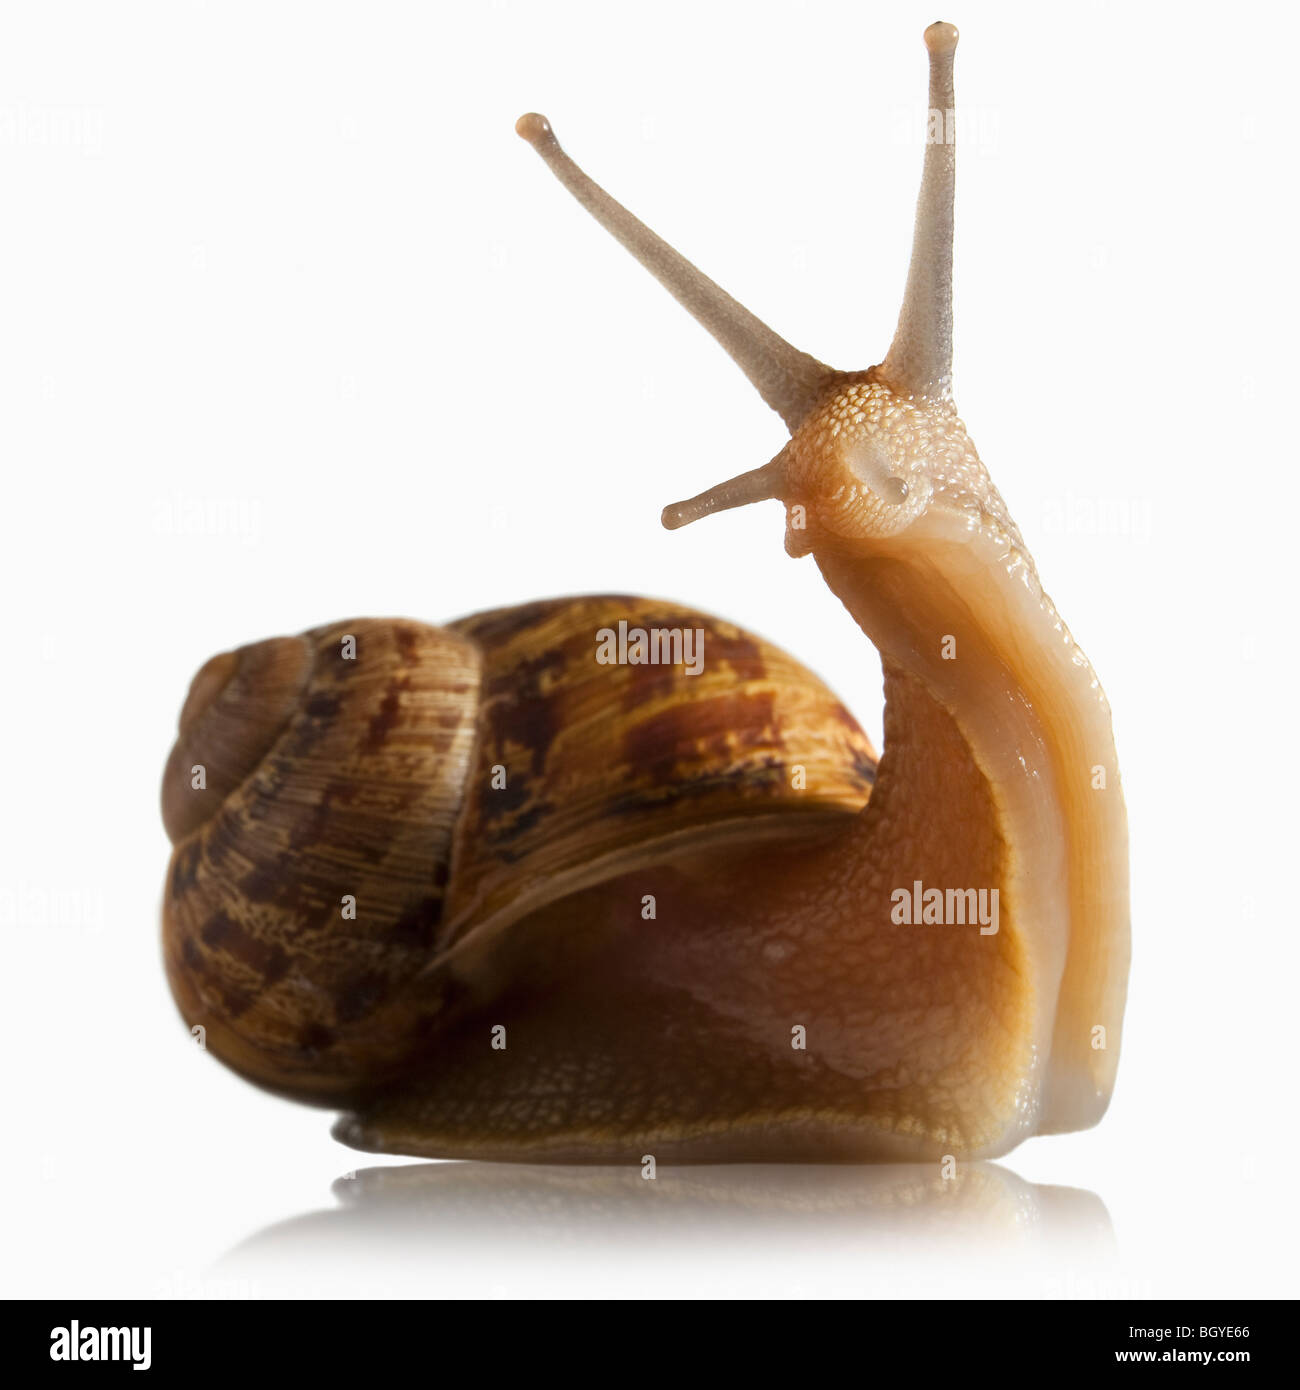 Snail out of shell Stock Photo